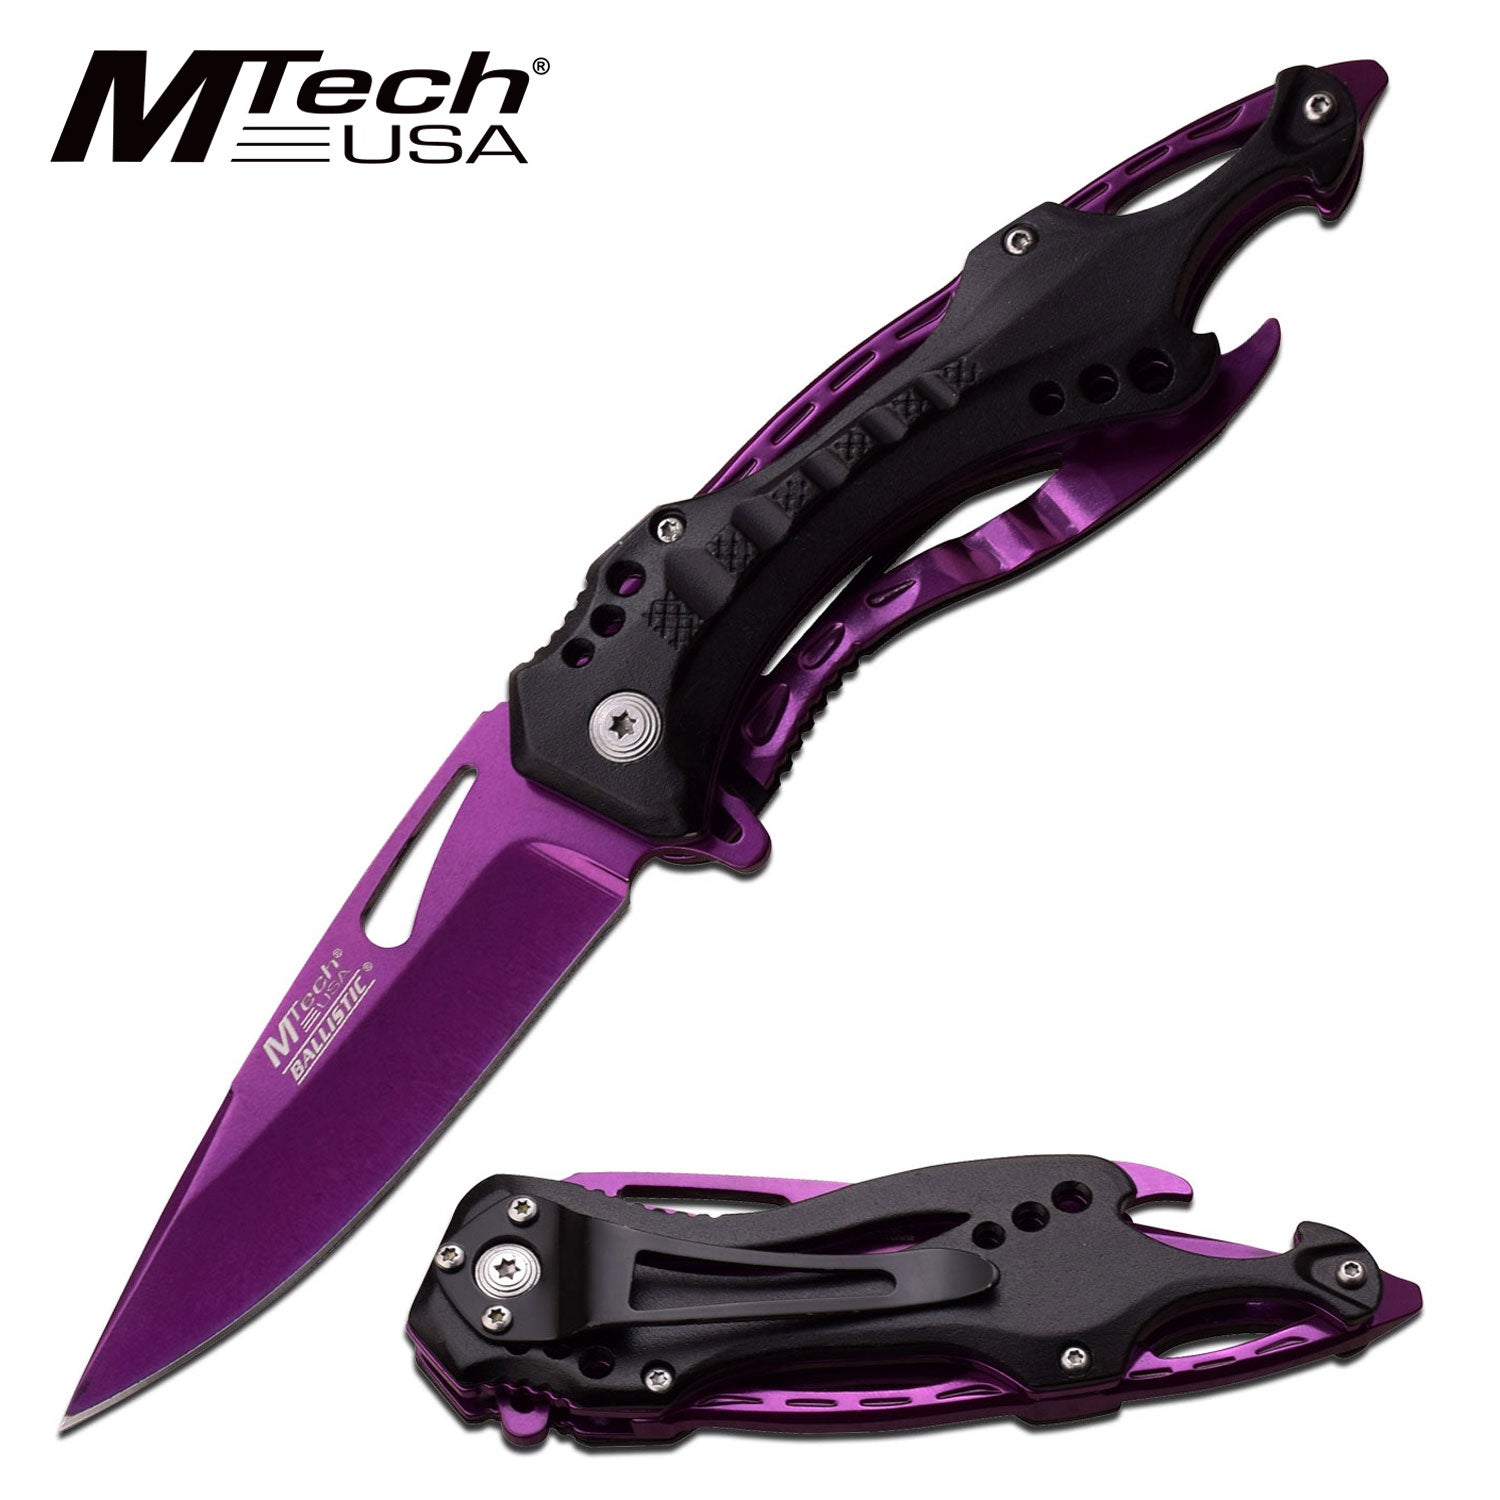 GIFTS INFINITY 4.5" Closed Personalized Engraved Folding Pocket Knife, Purple Stainless Steel Tactical Blade Knife with Black Handle